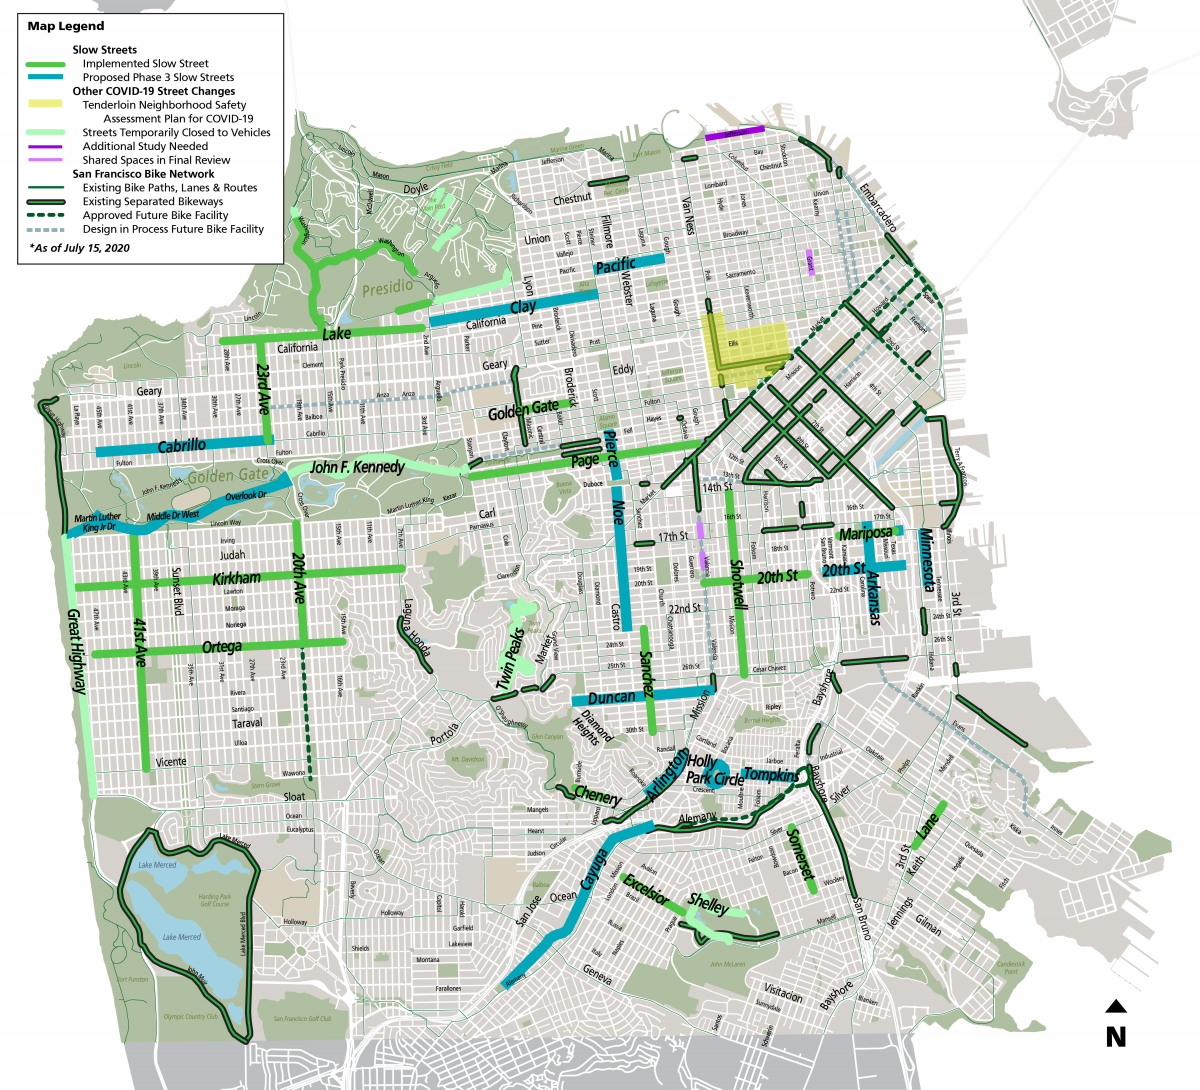 Slow Streets Map